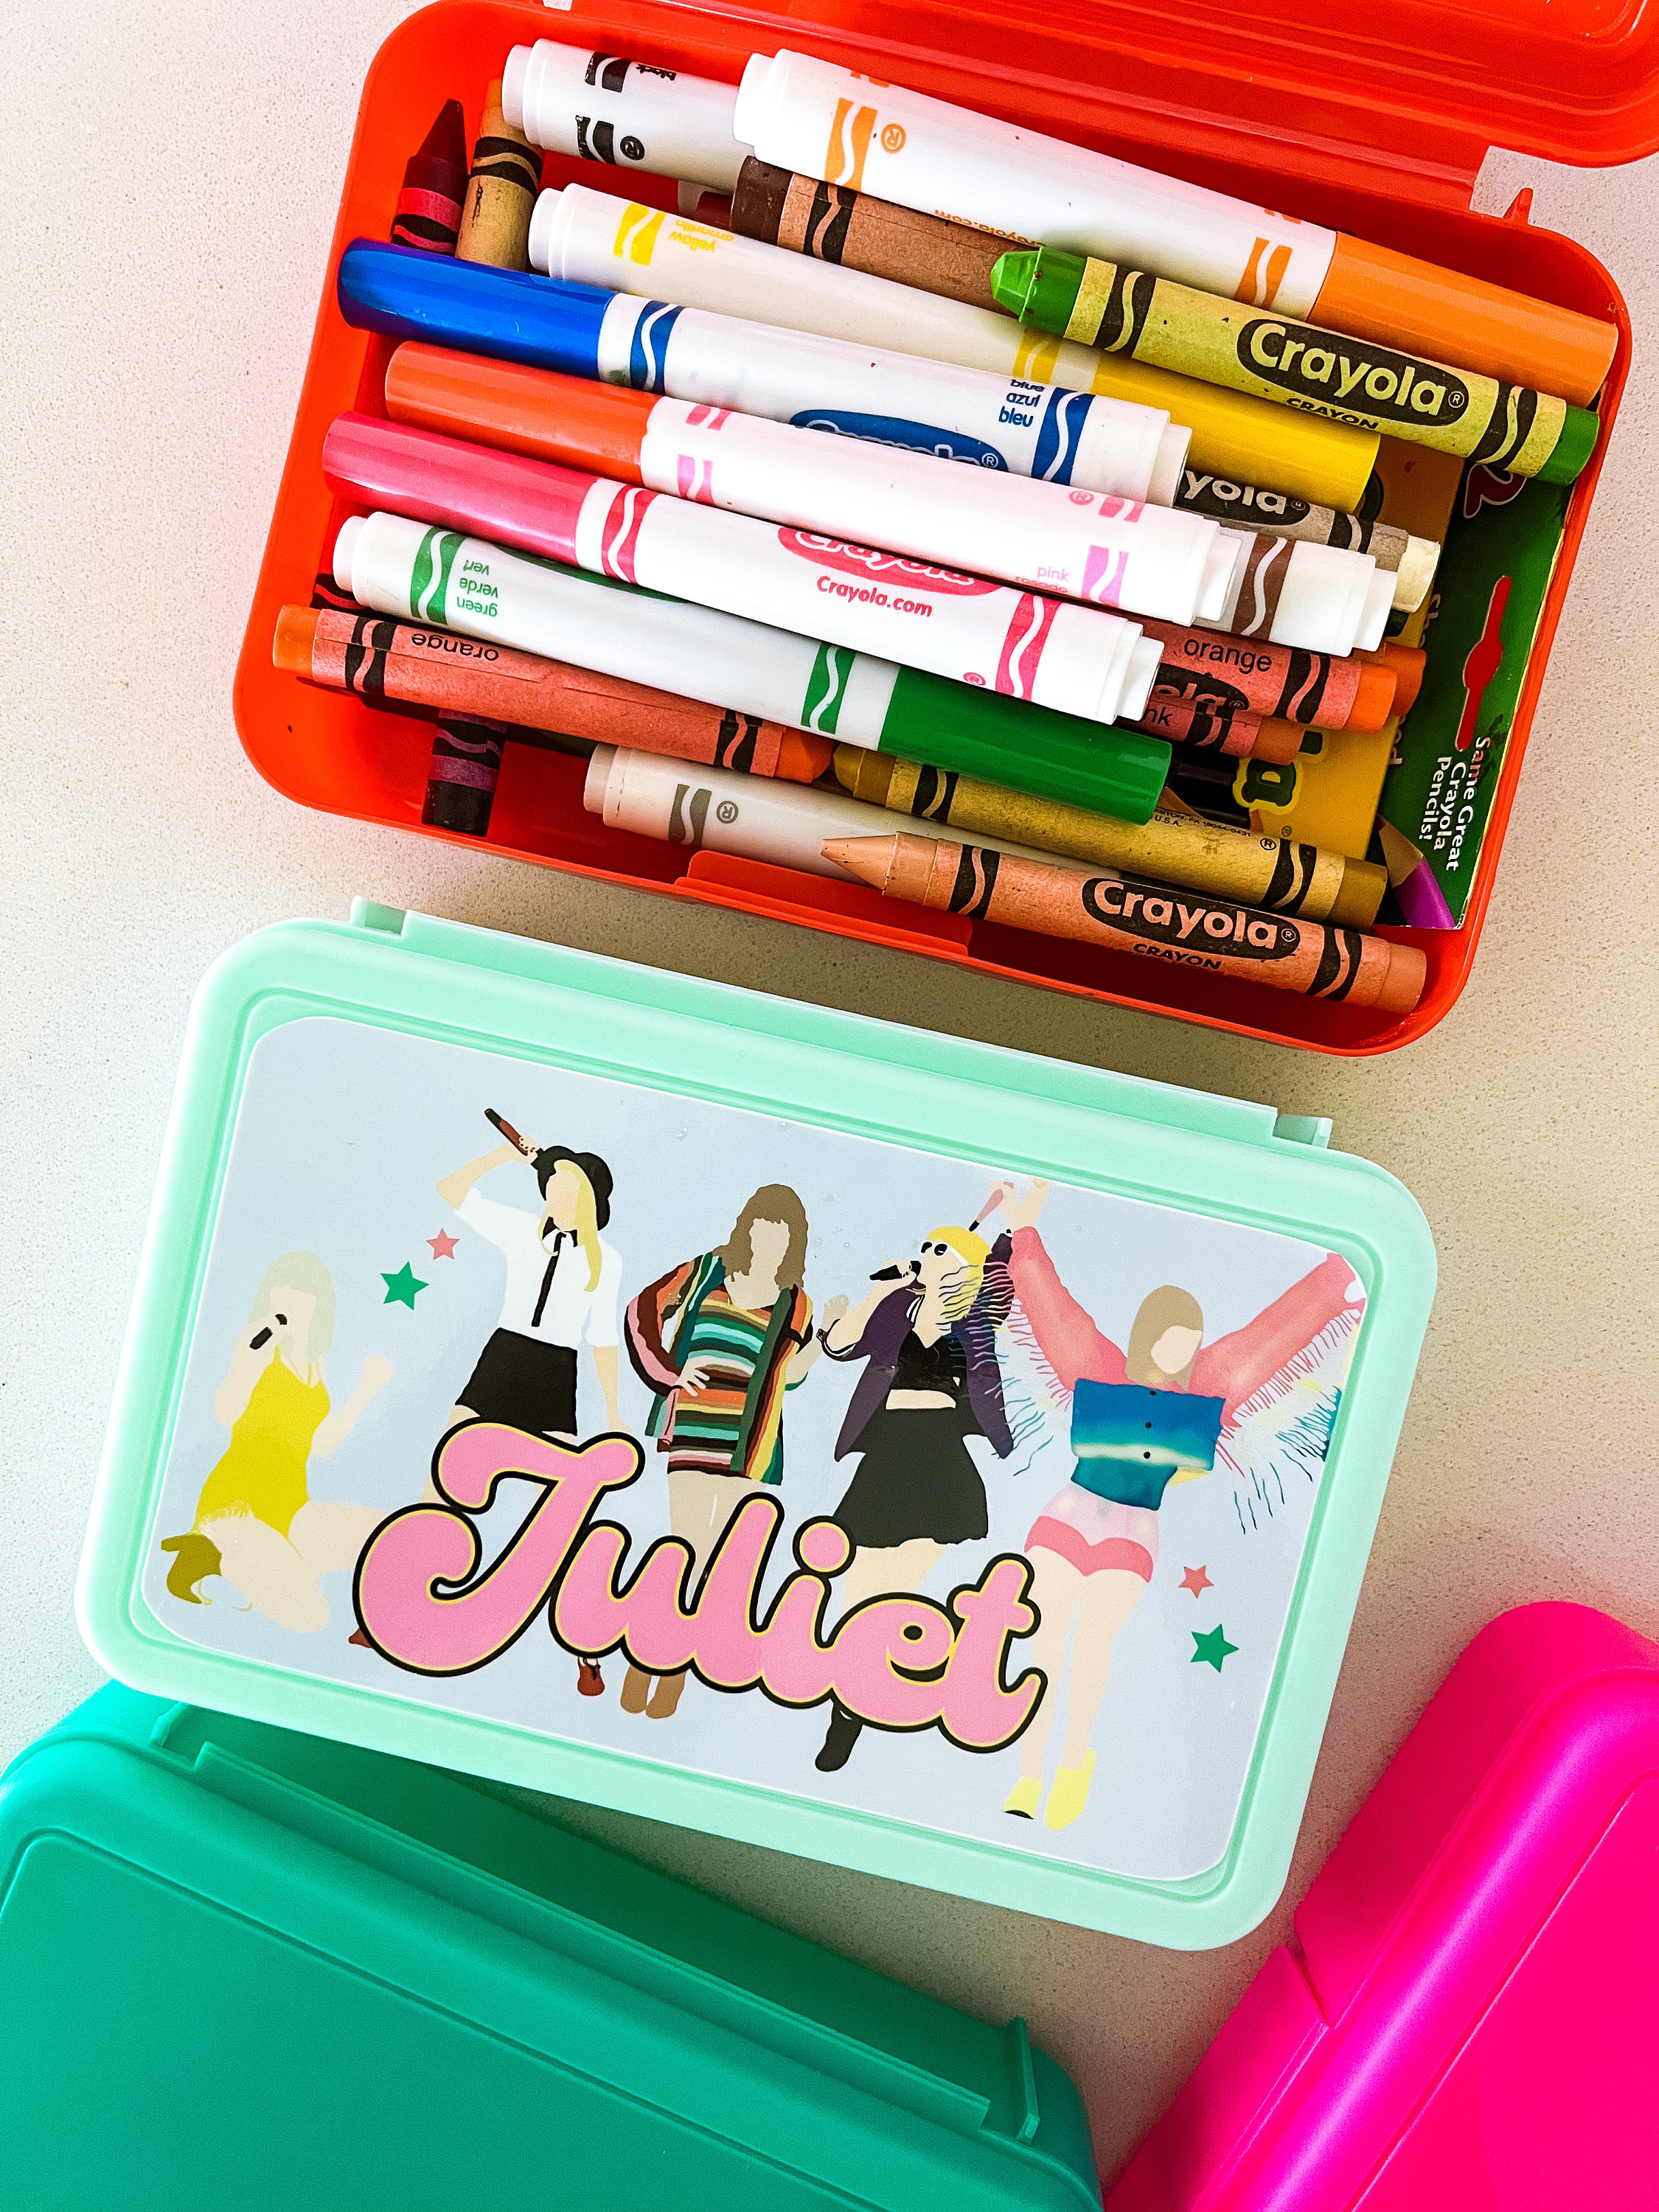 Pencil Box Taylor Swift, for Girls, Back to School Personalized Gift  Concert Merch Supplies Crayons, Art Gift, Birthday Present 